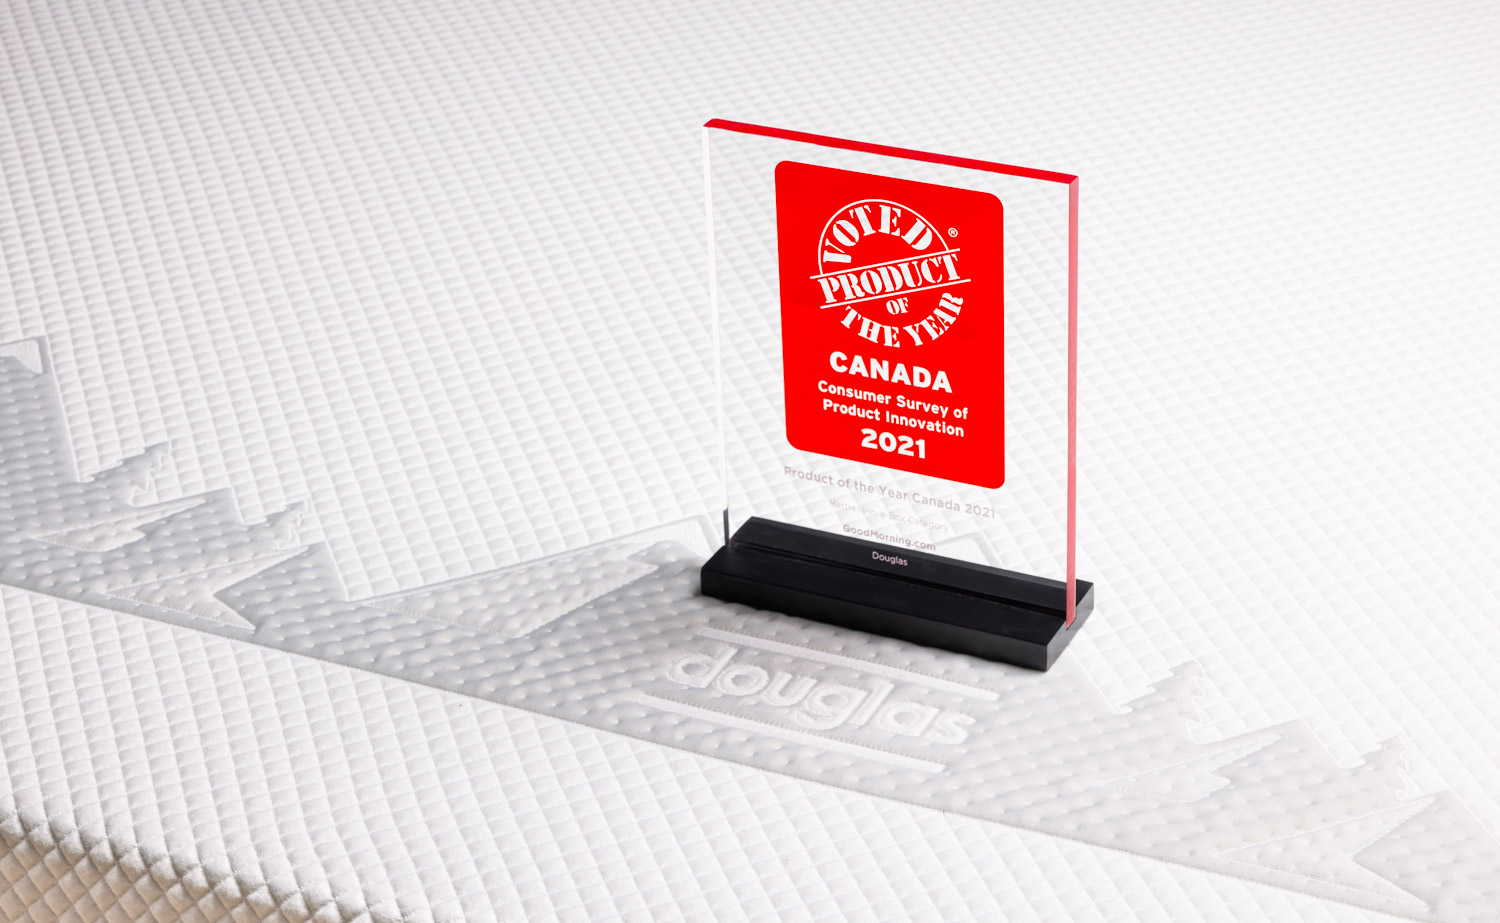 2021 Product of the Year award on a Douglas mattress